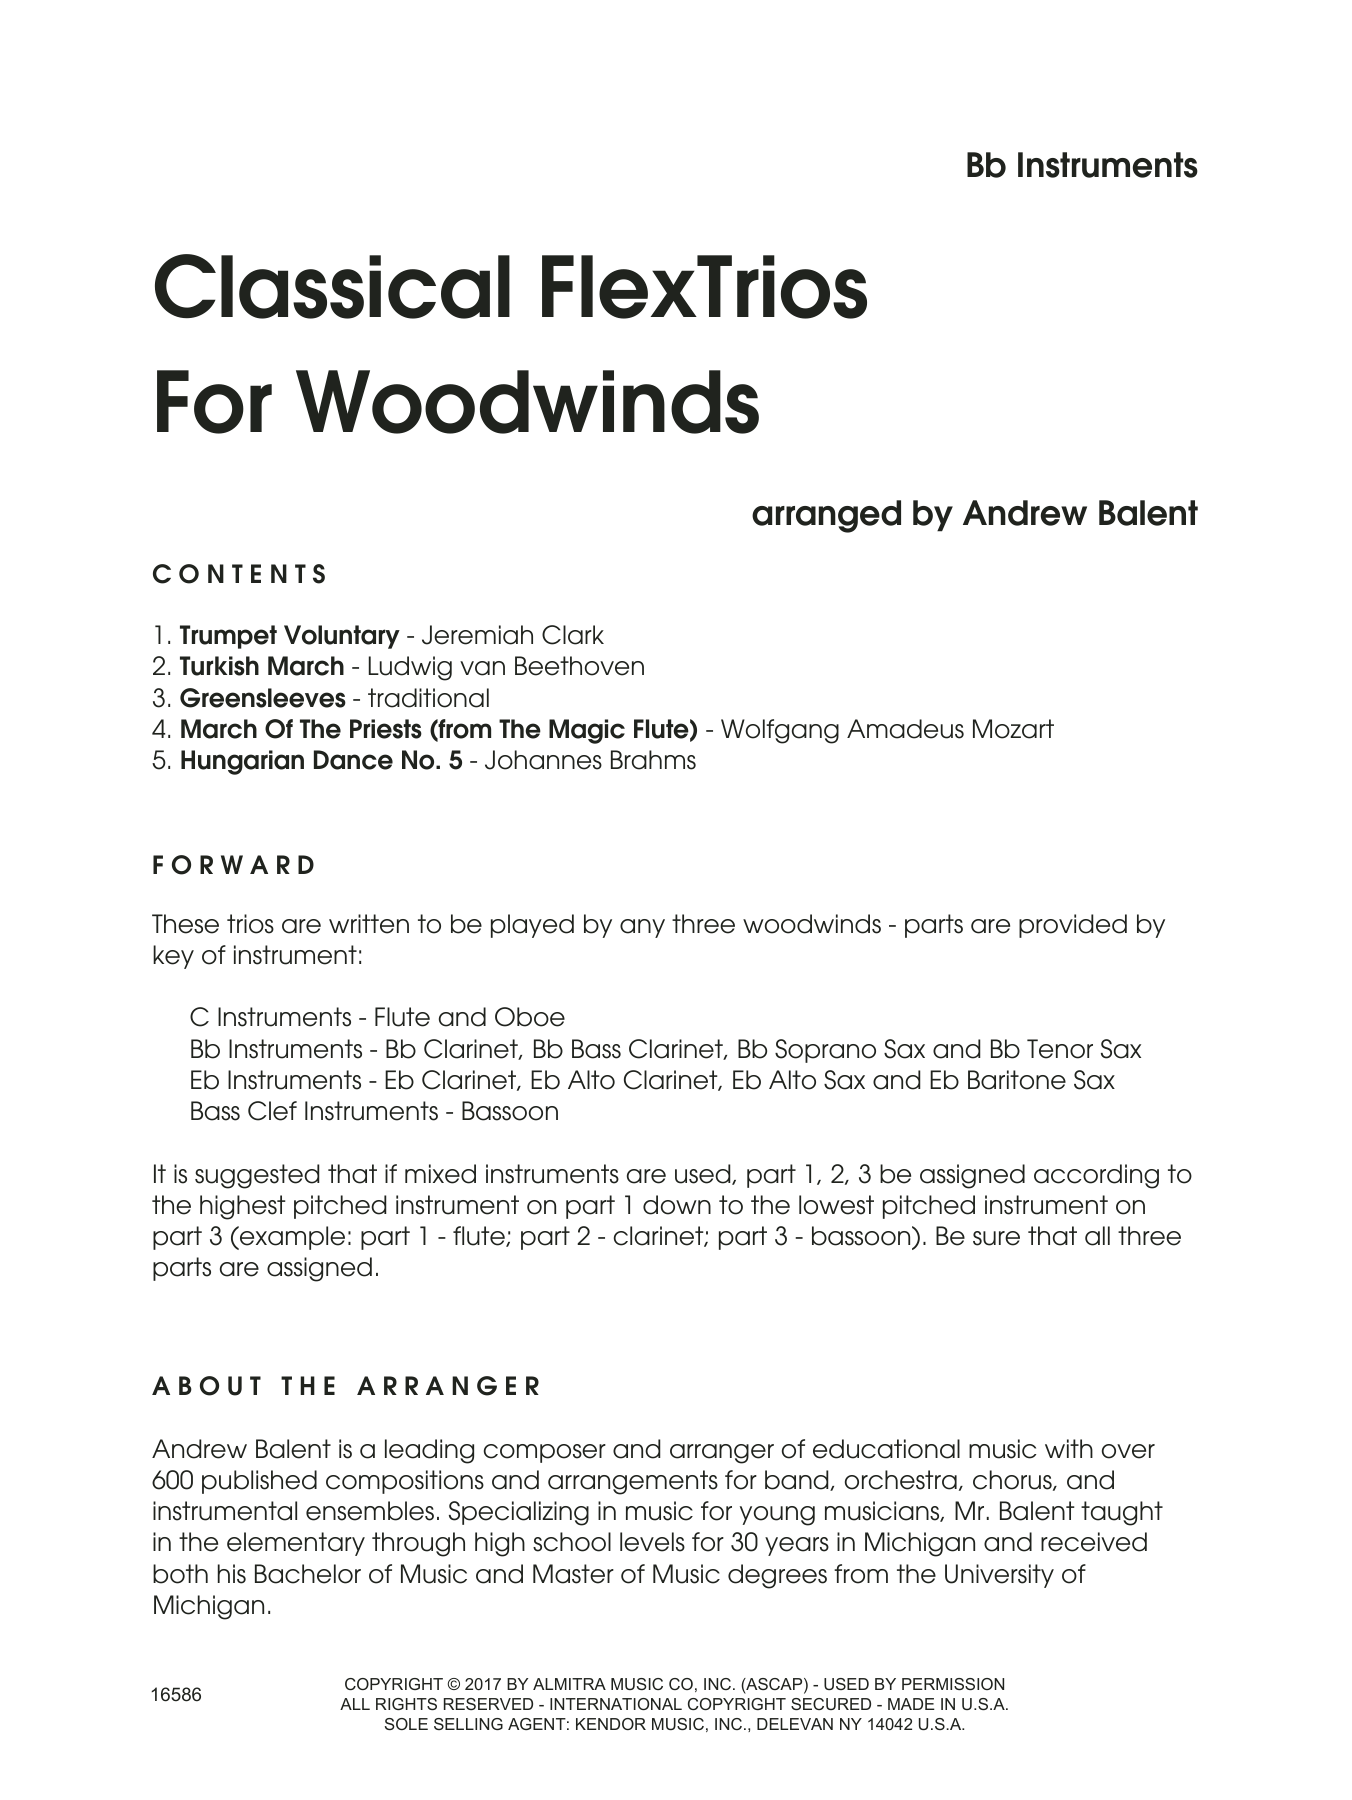 Download Andrew Balent Classical FlexTrios For Woodwinds - Bb Sheet Music